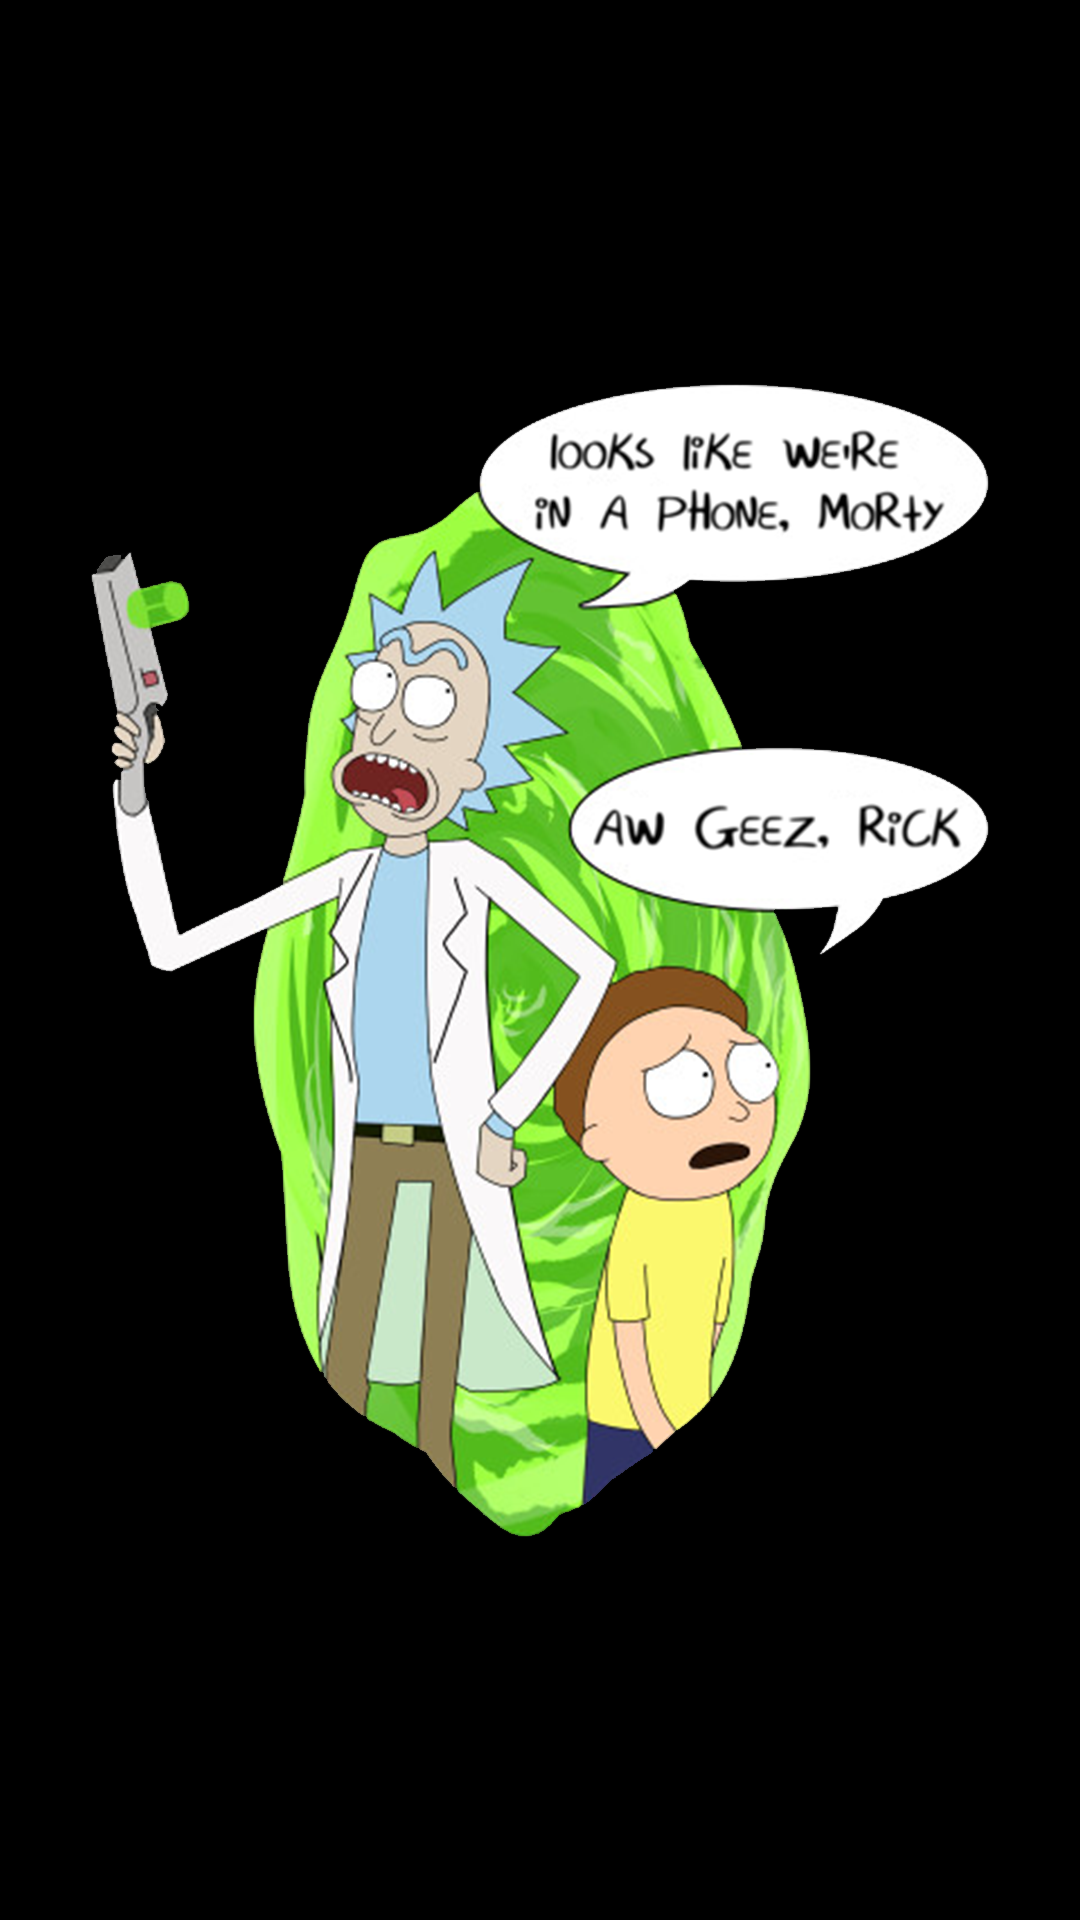 Rick And Morty Amoled 4k Wallpapers - Wallpaper Cave